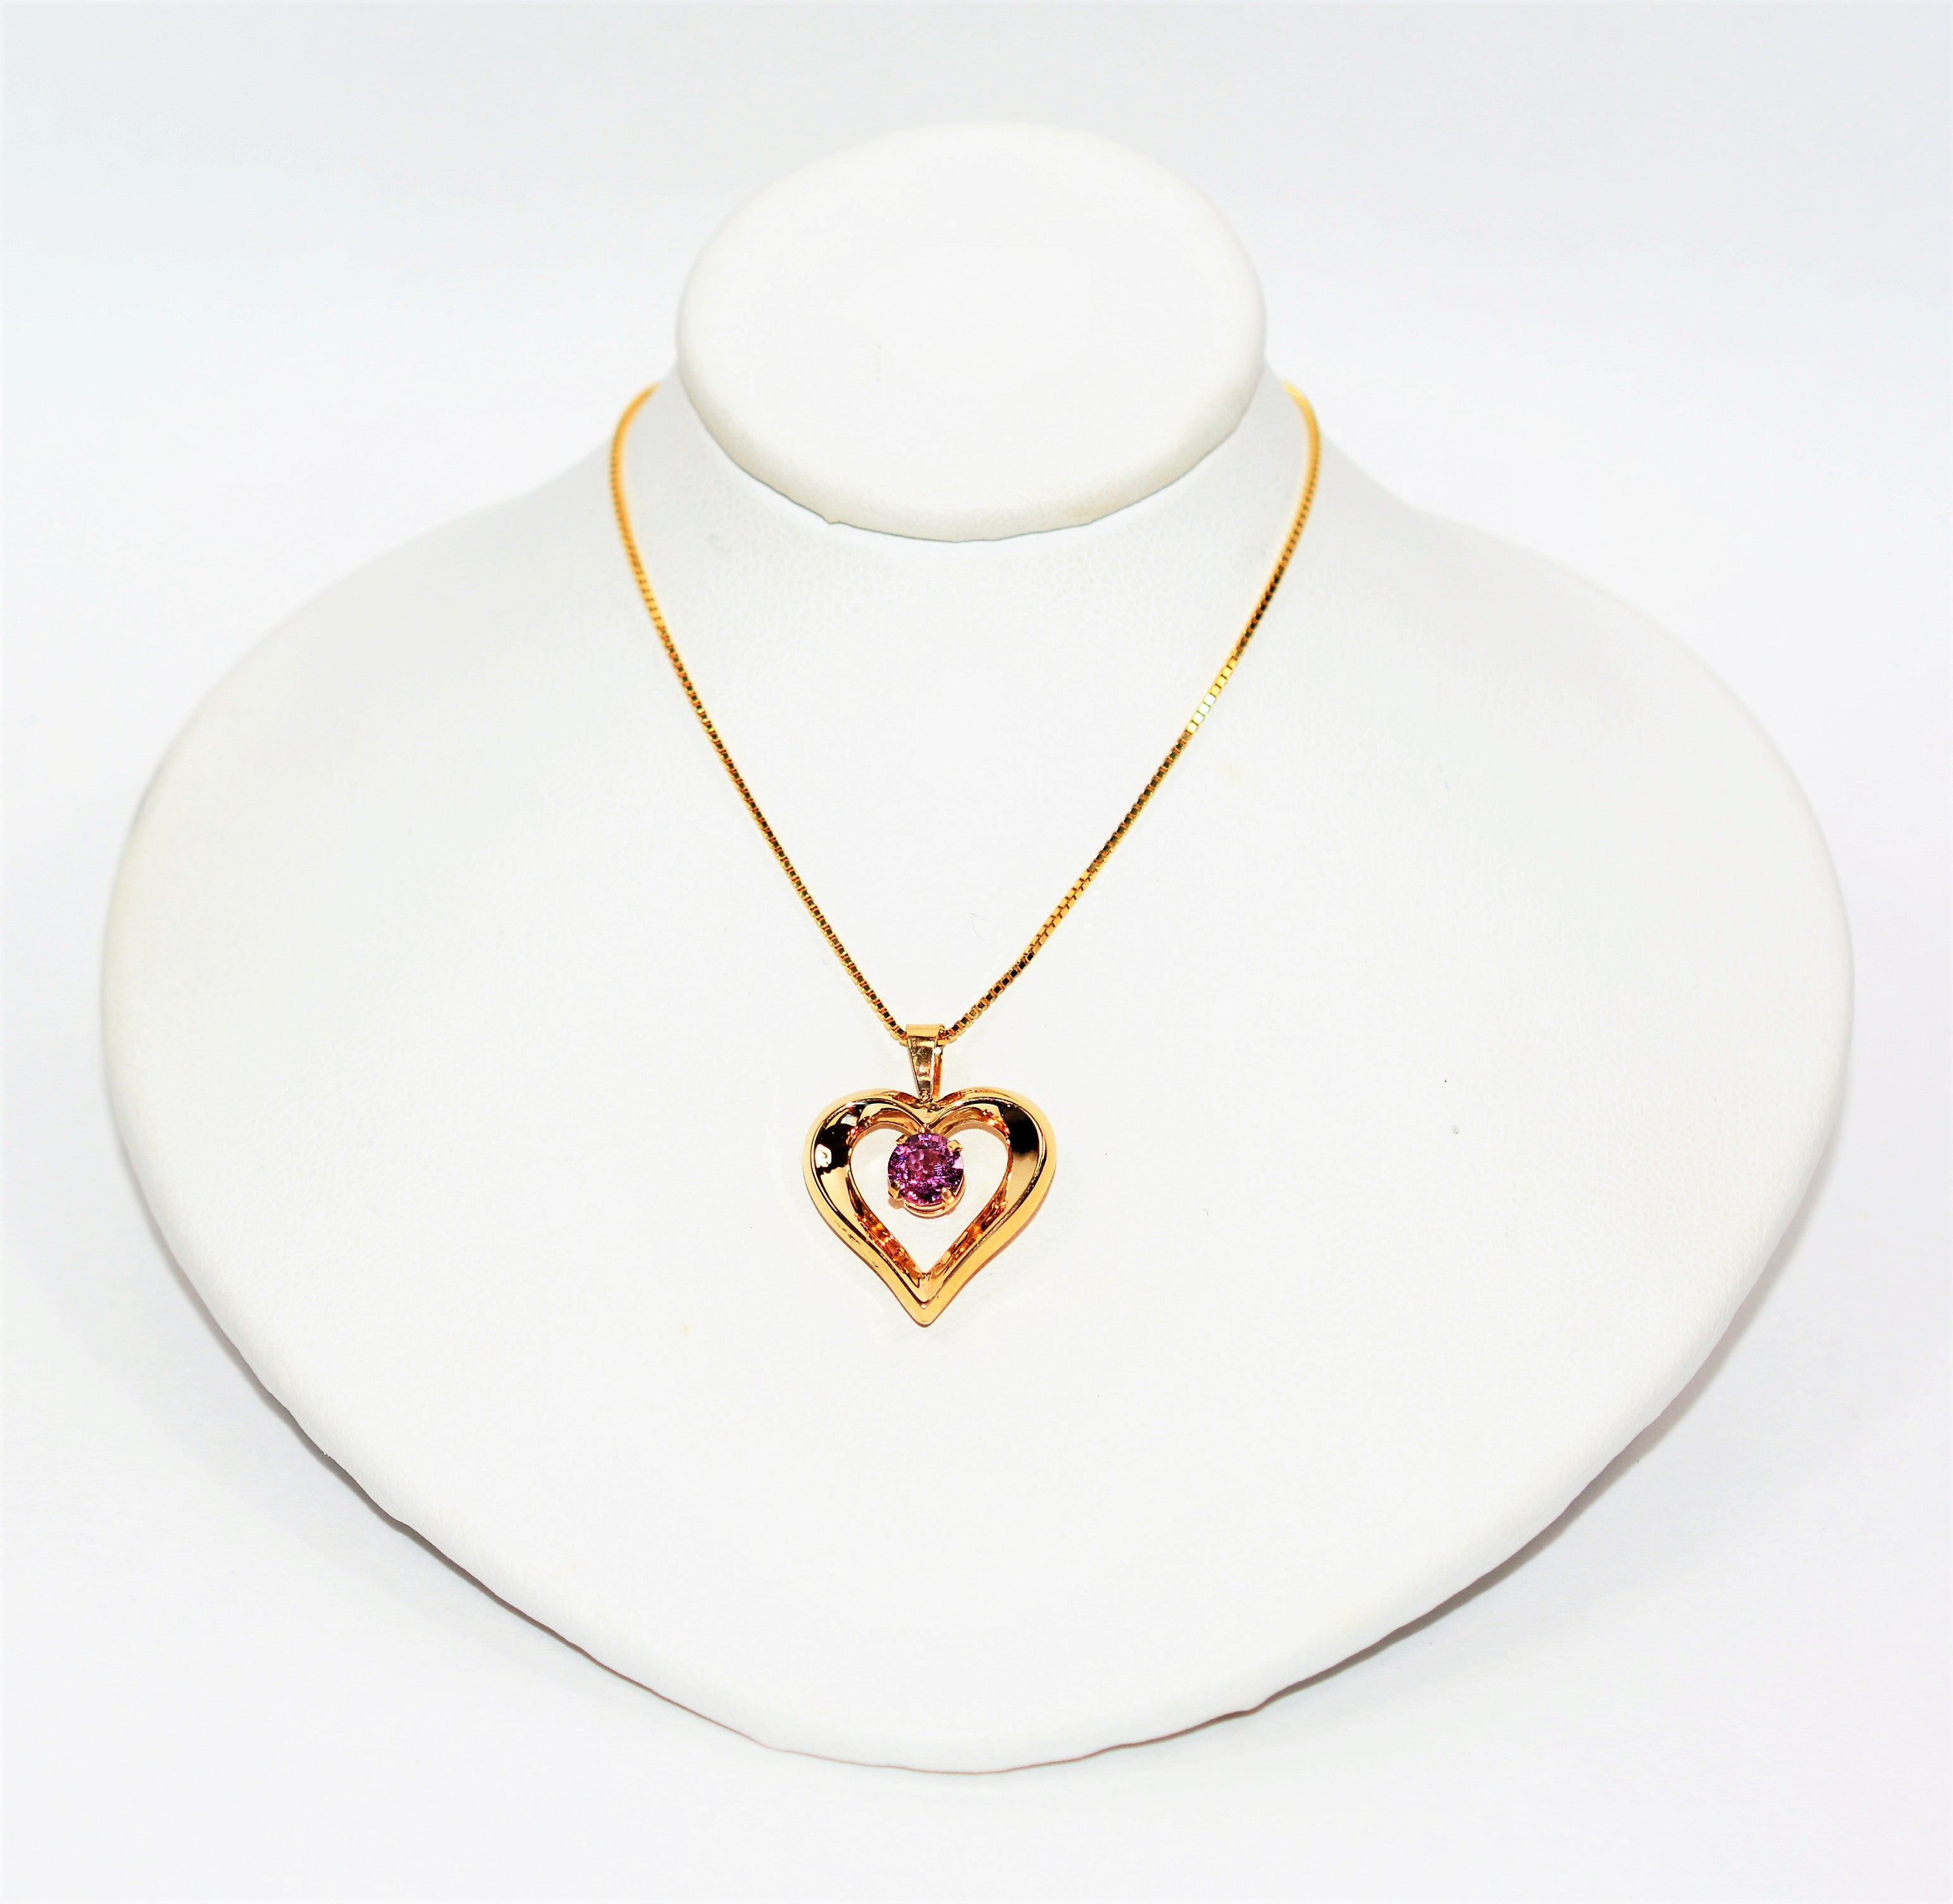 Natural Padparadscha Sapphire Necklace 10K Solid Gold .52ct Heart Pendant Solitaire Necklace Pink Necklace Birthstone Necklace Fine Jewelry